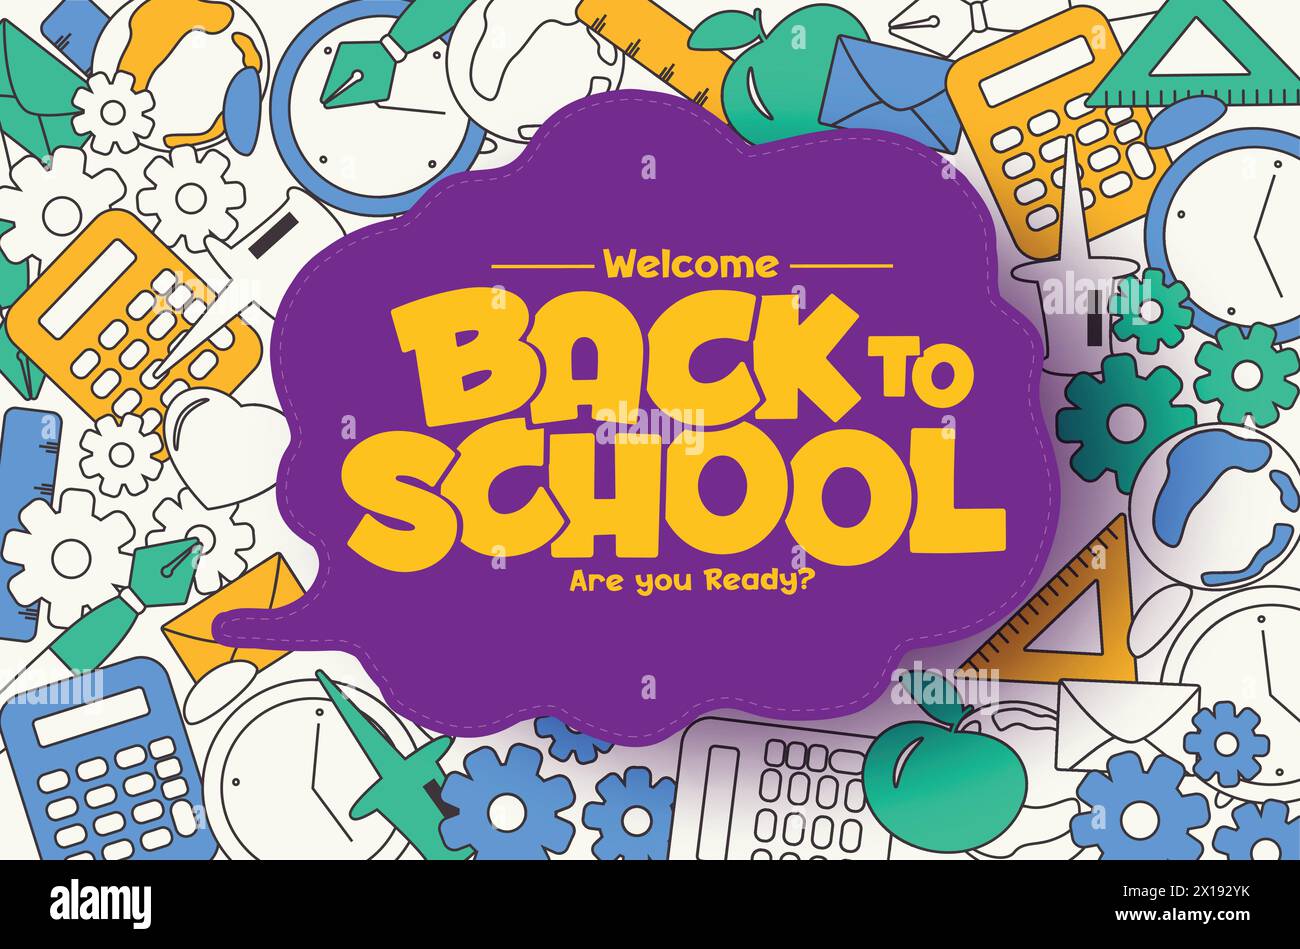 Back to school text vector template design. Welcome back to school greeting in speech bubble space with doodle educational elements, supplies Stock Vector